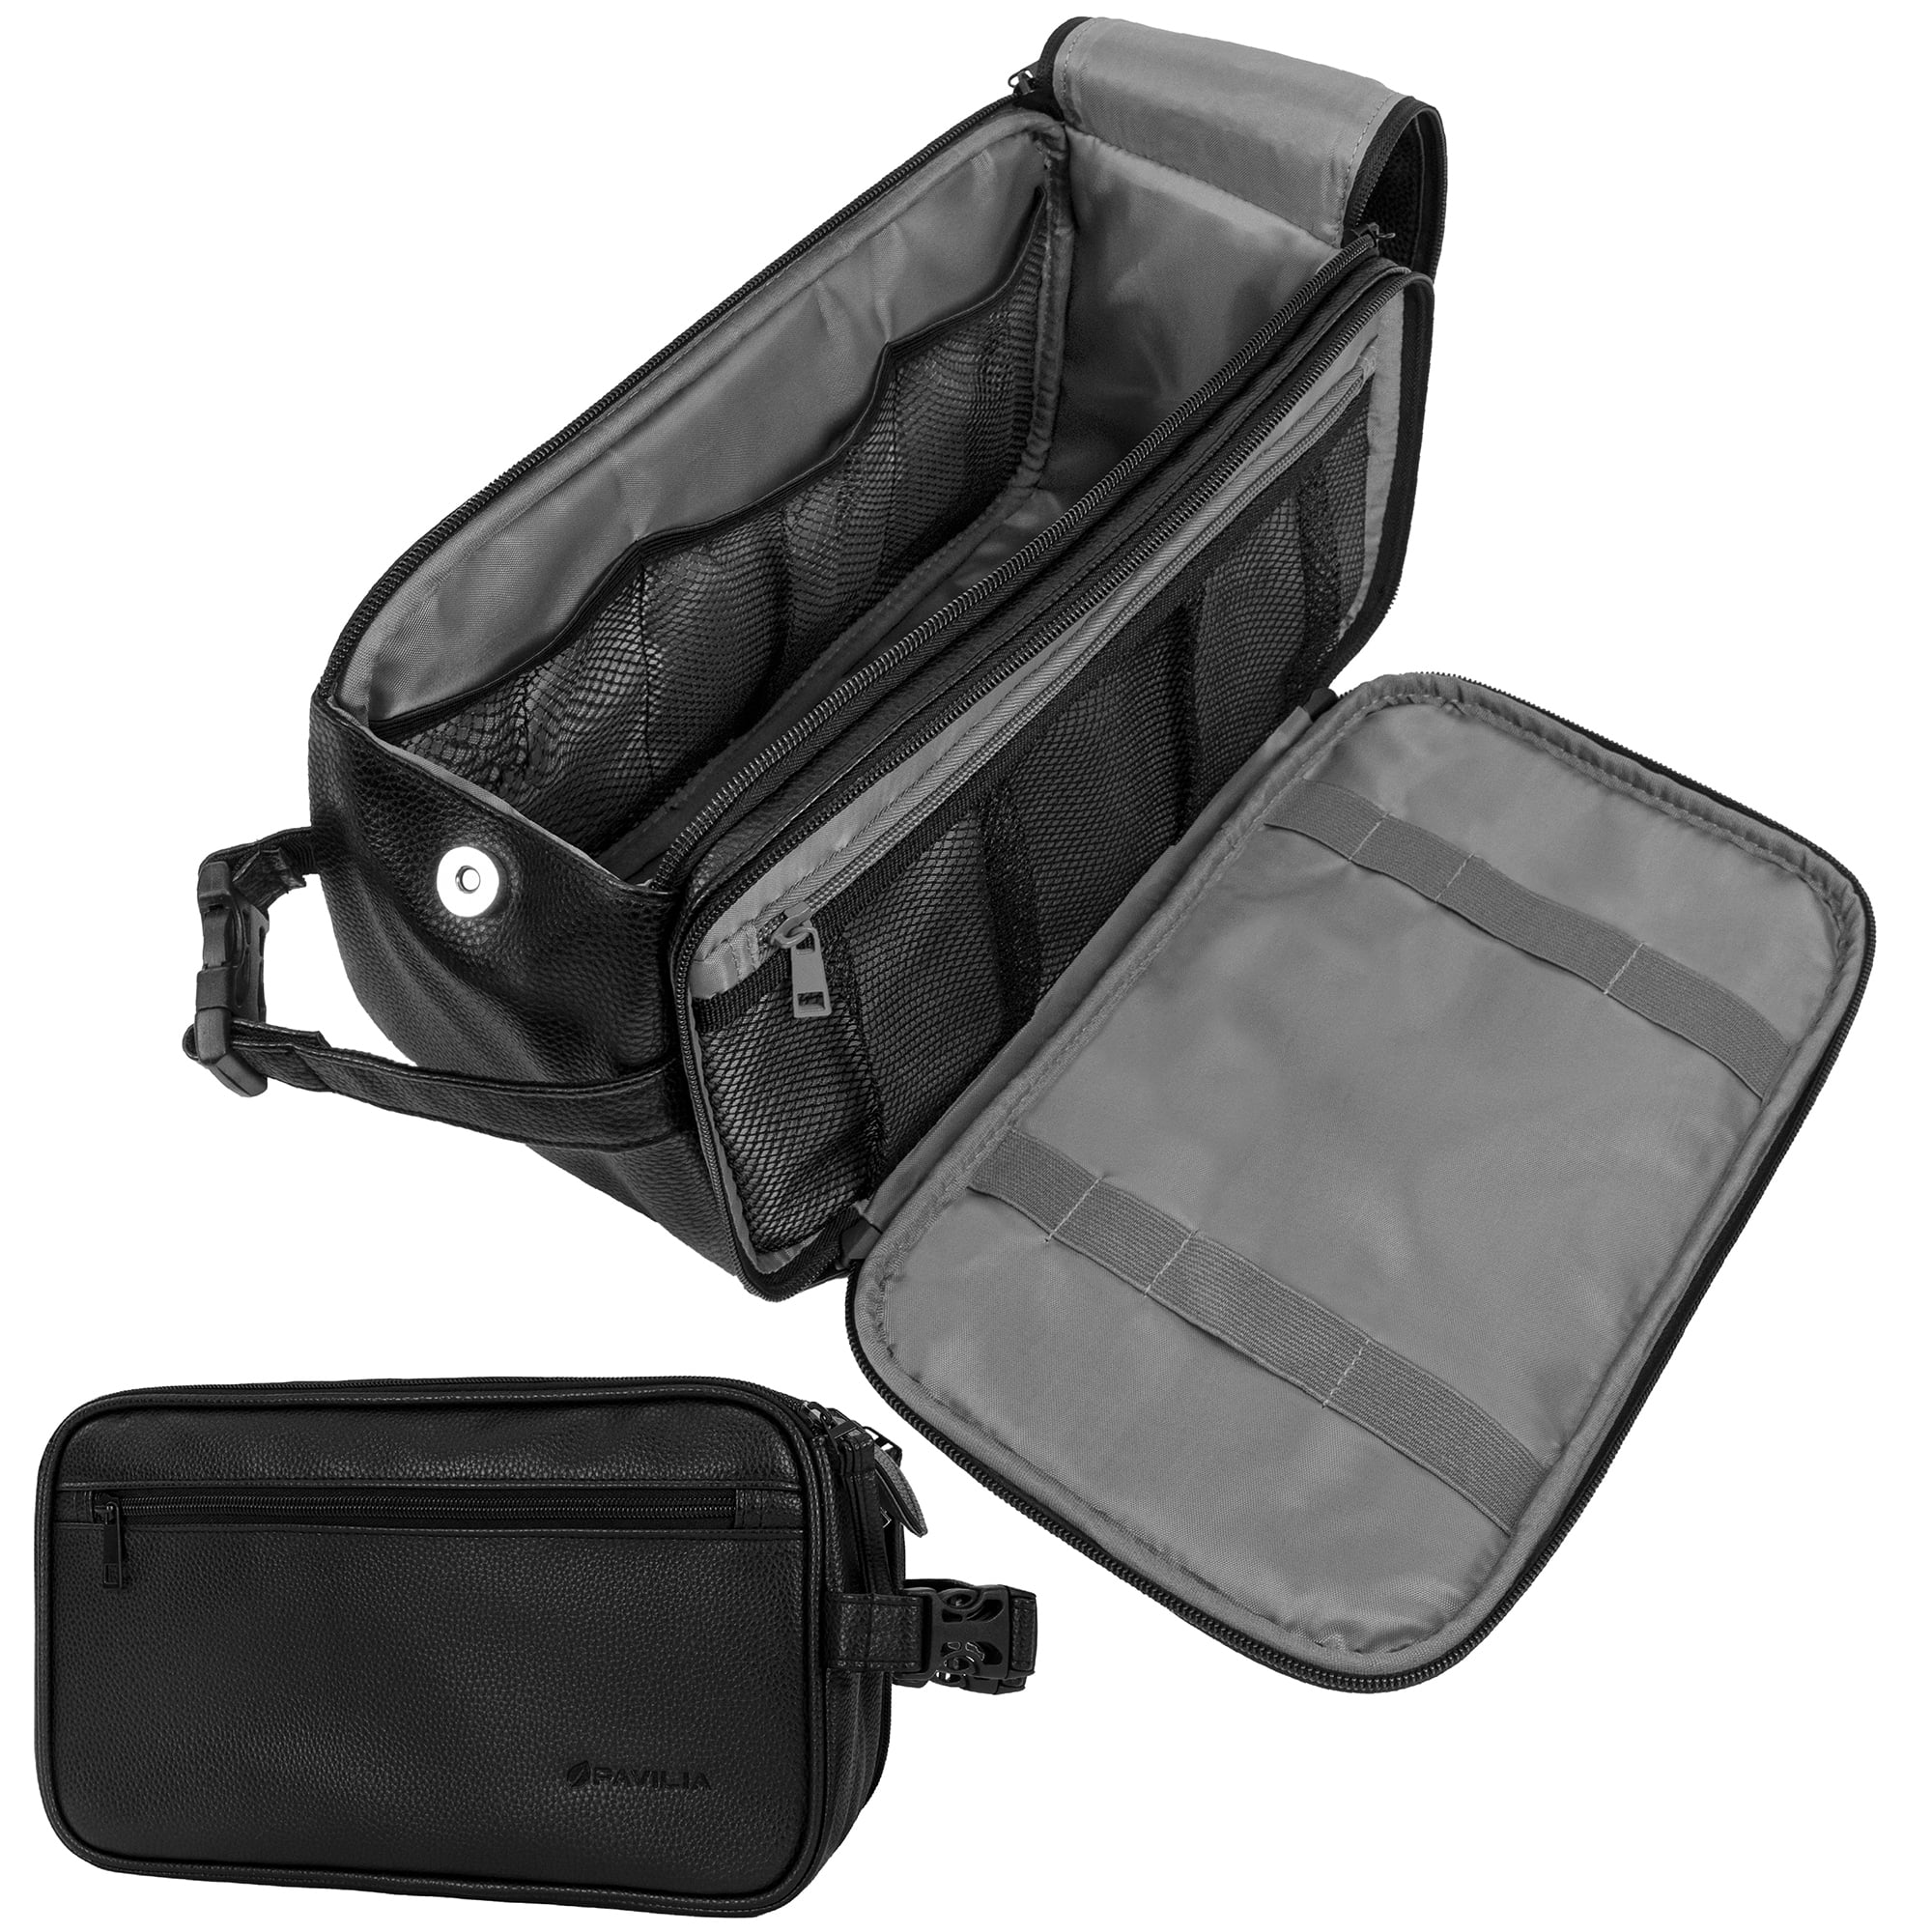 Large Men's Leather Toiletry Bag For Men>s Grooming Essentials